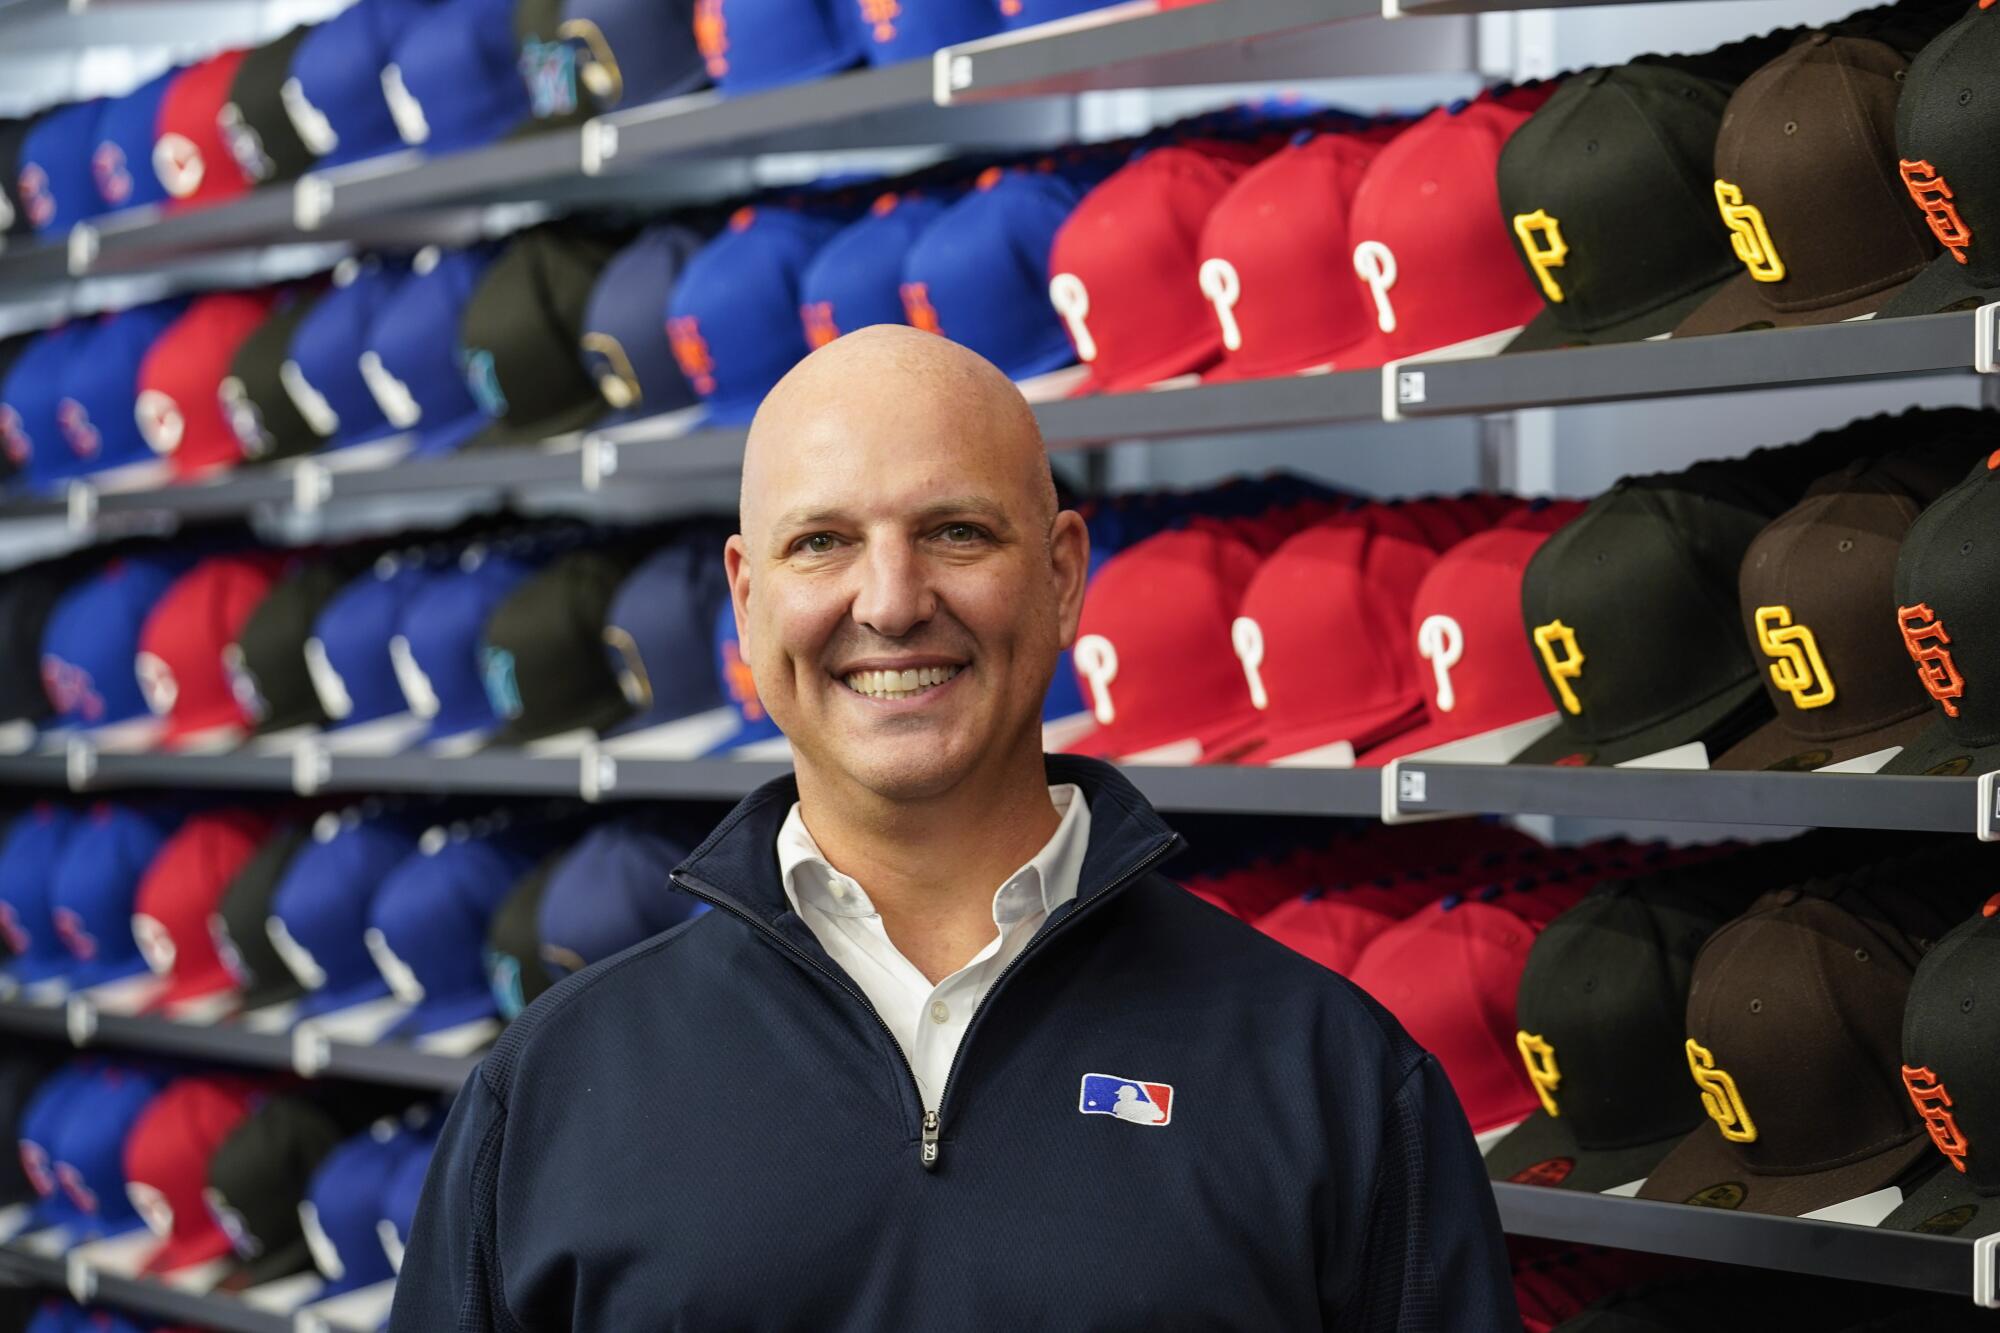 MLB’s chief revenue officer Noah Garden poses at the MLB Flagship store Wednesday, Sept. 30, 2020, in New York.